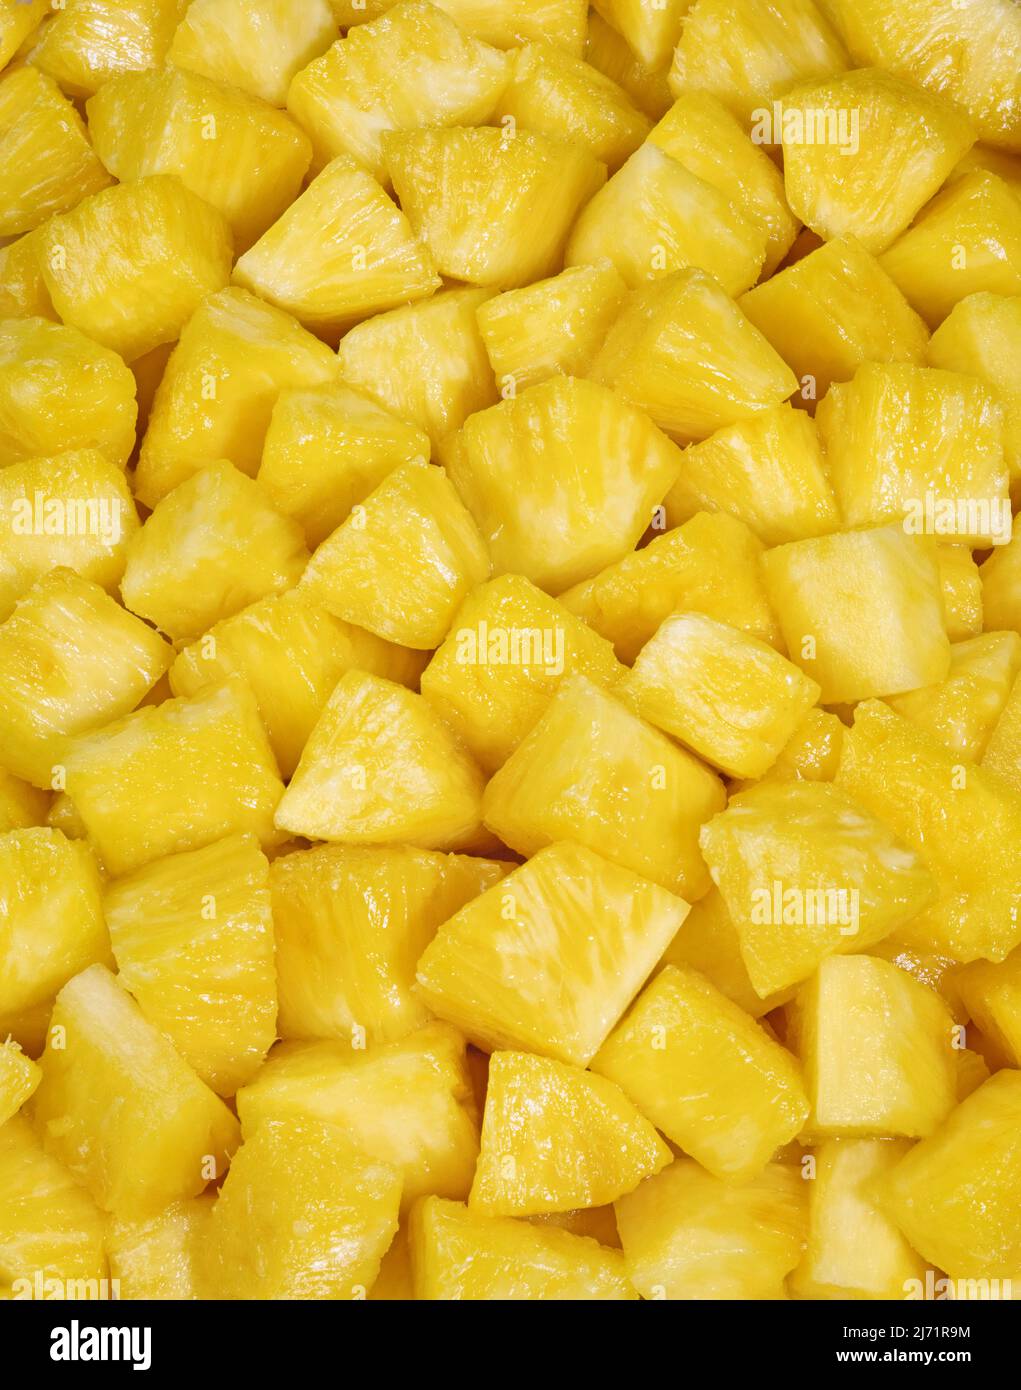 Pineapple cut in juicy chunks. Image from 4x5 inch film transparency. Stock Photo